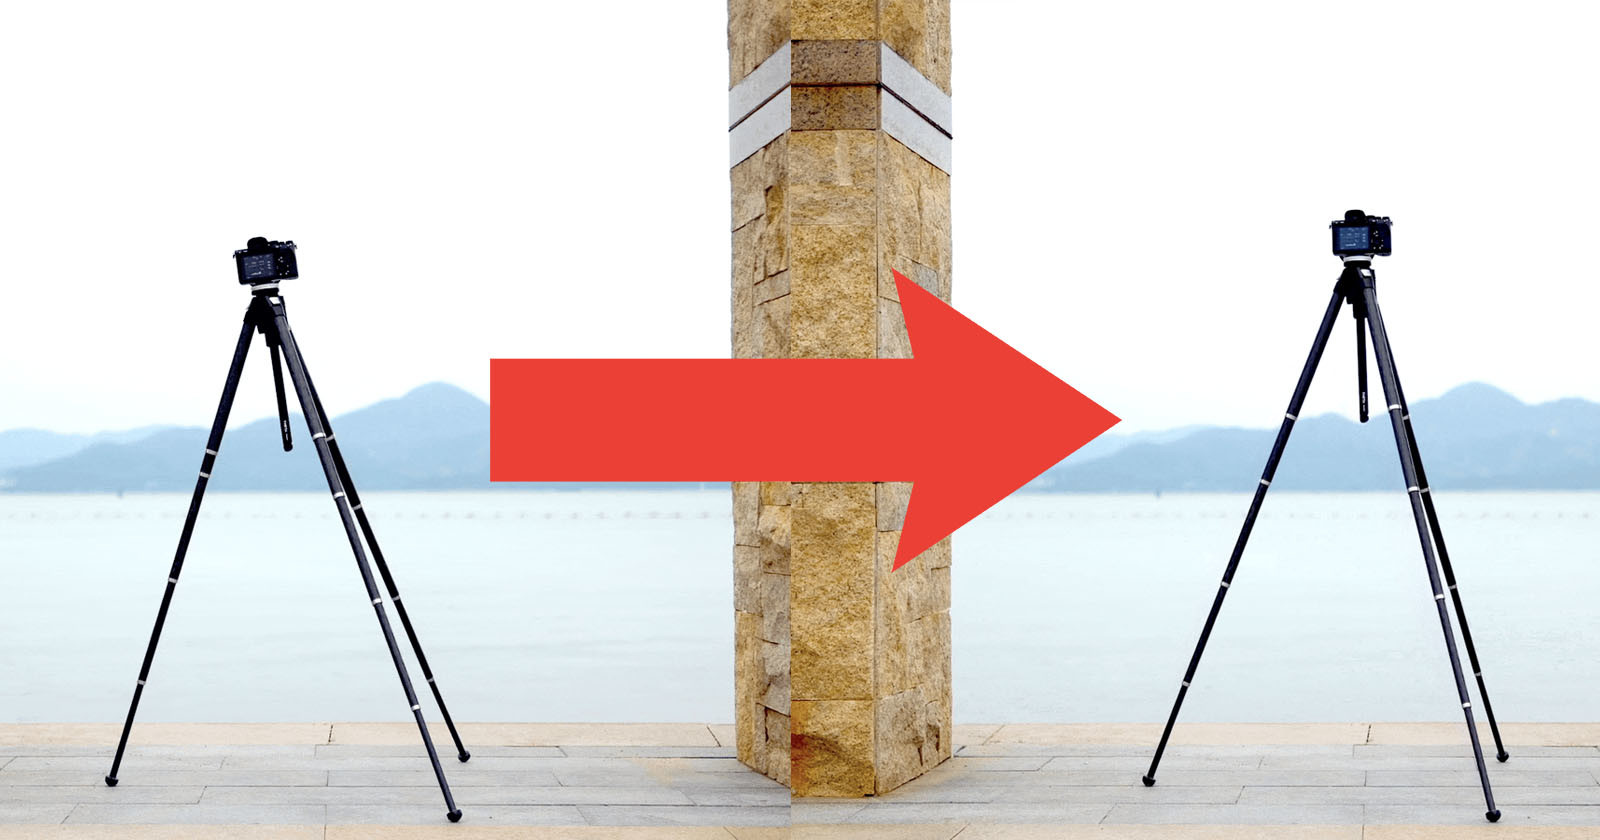 The Benro Theta is the Worlds First Auto-Leveling Tripod